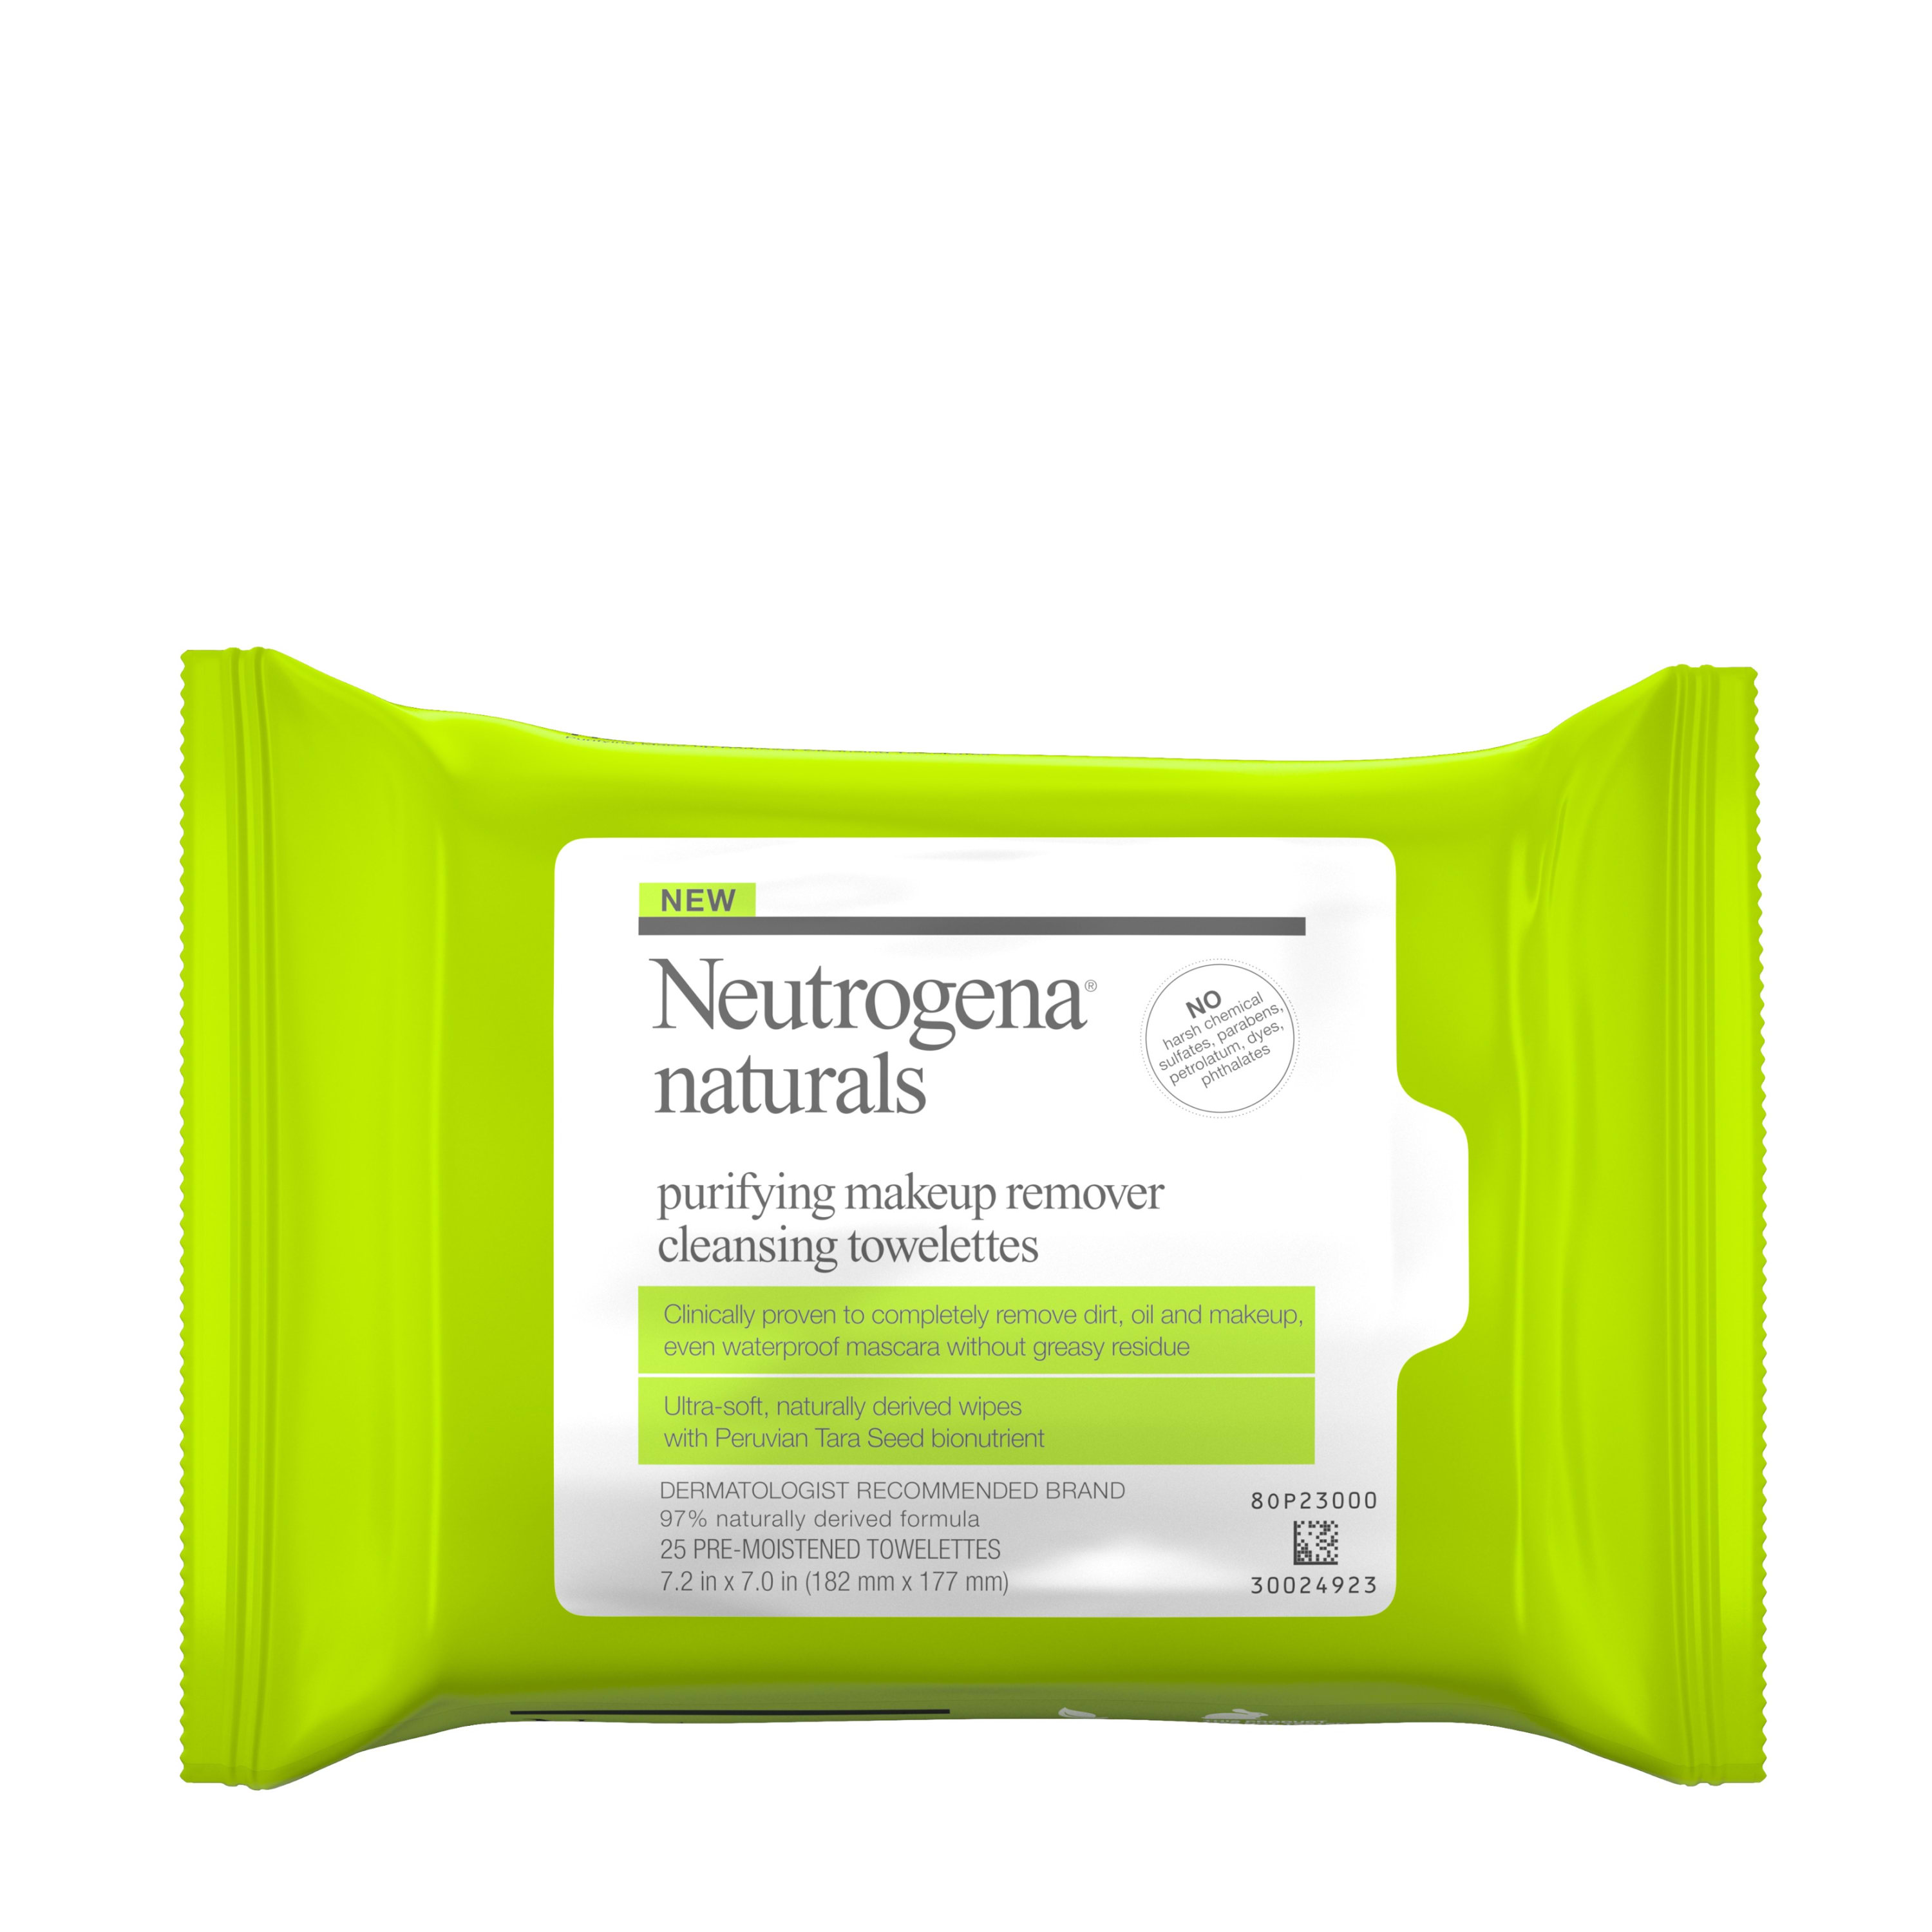 Neutrogena Naturals Purifying Makeup Remover Cleansing Wipes, 25 ct. - image 3 of 9